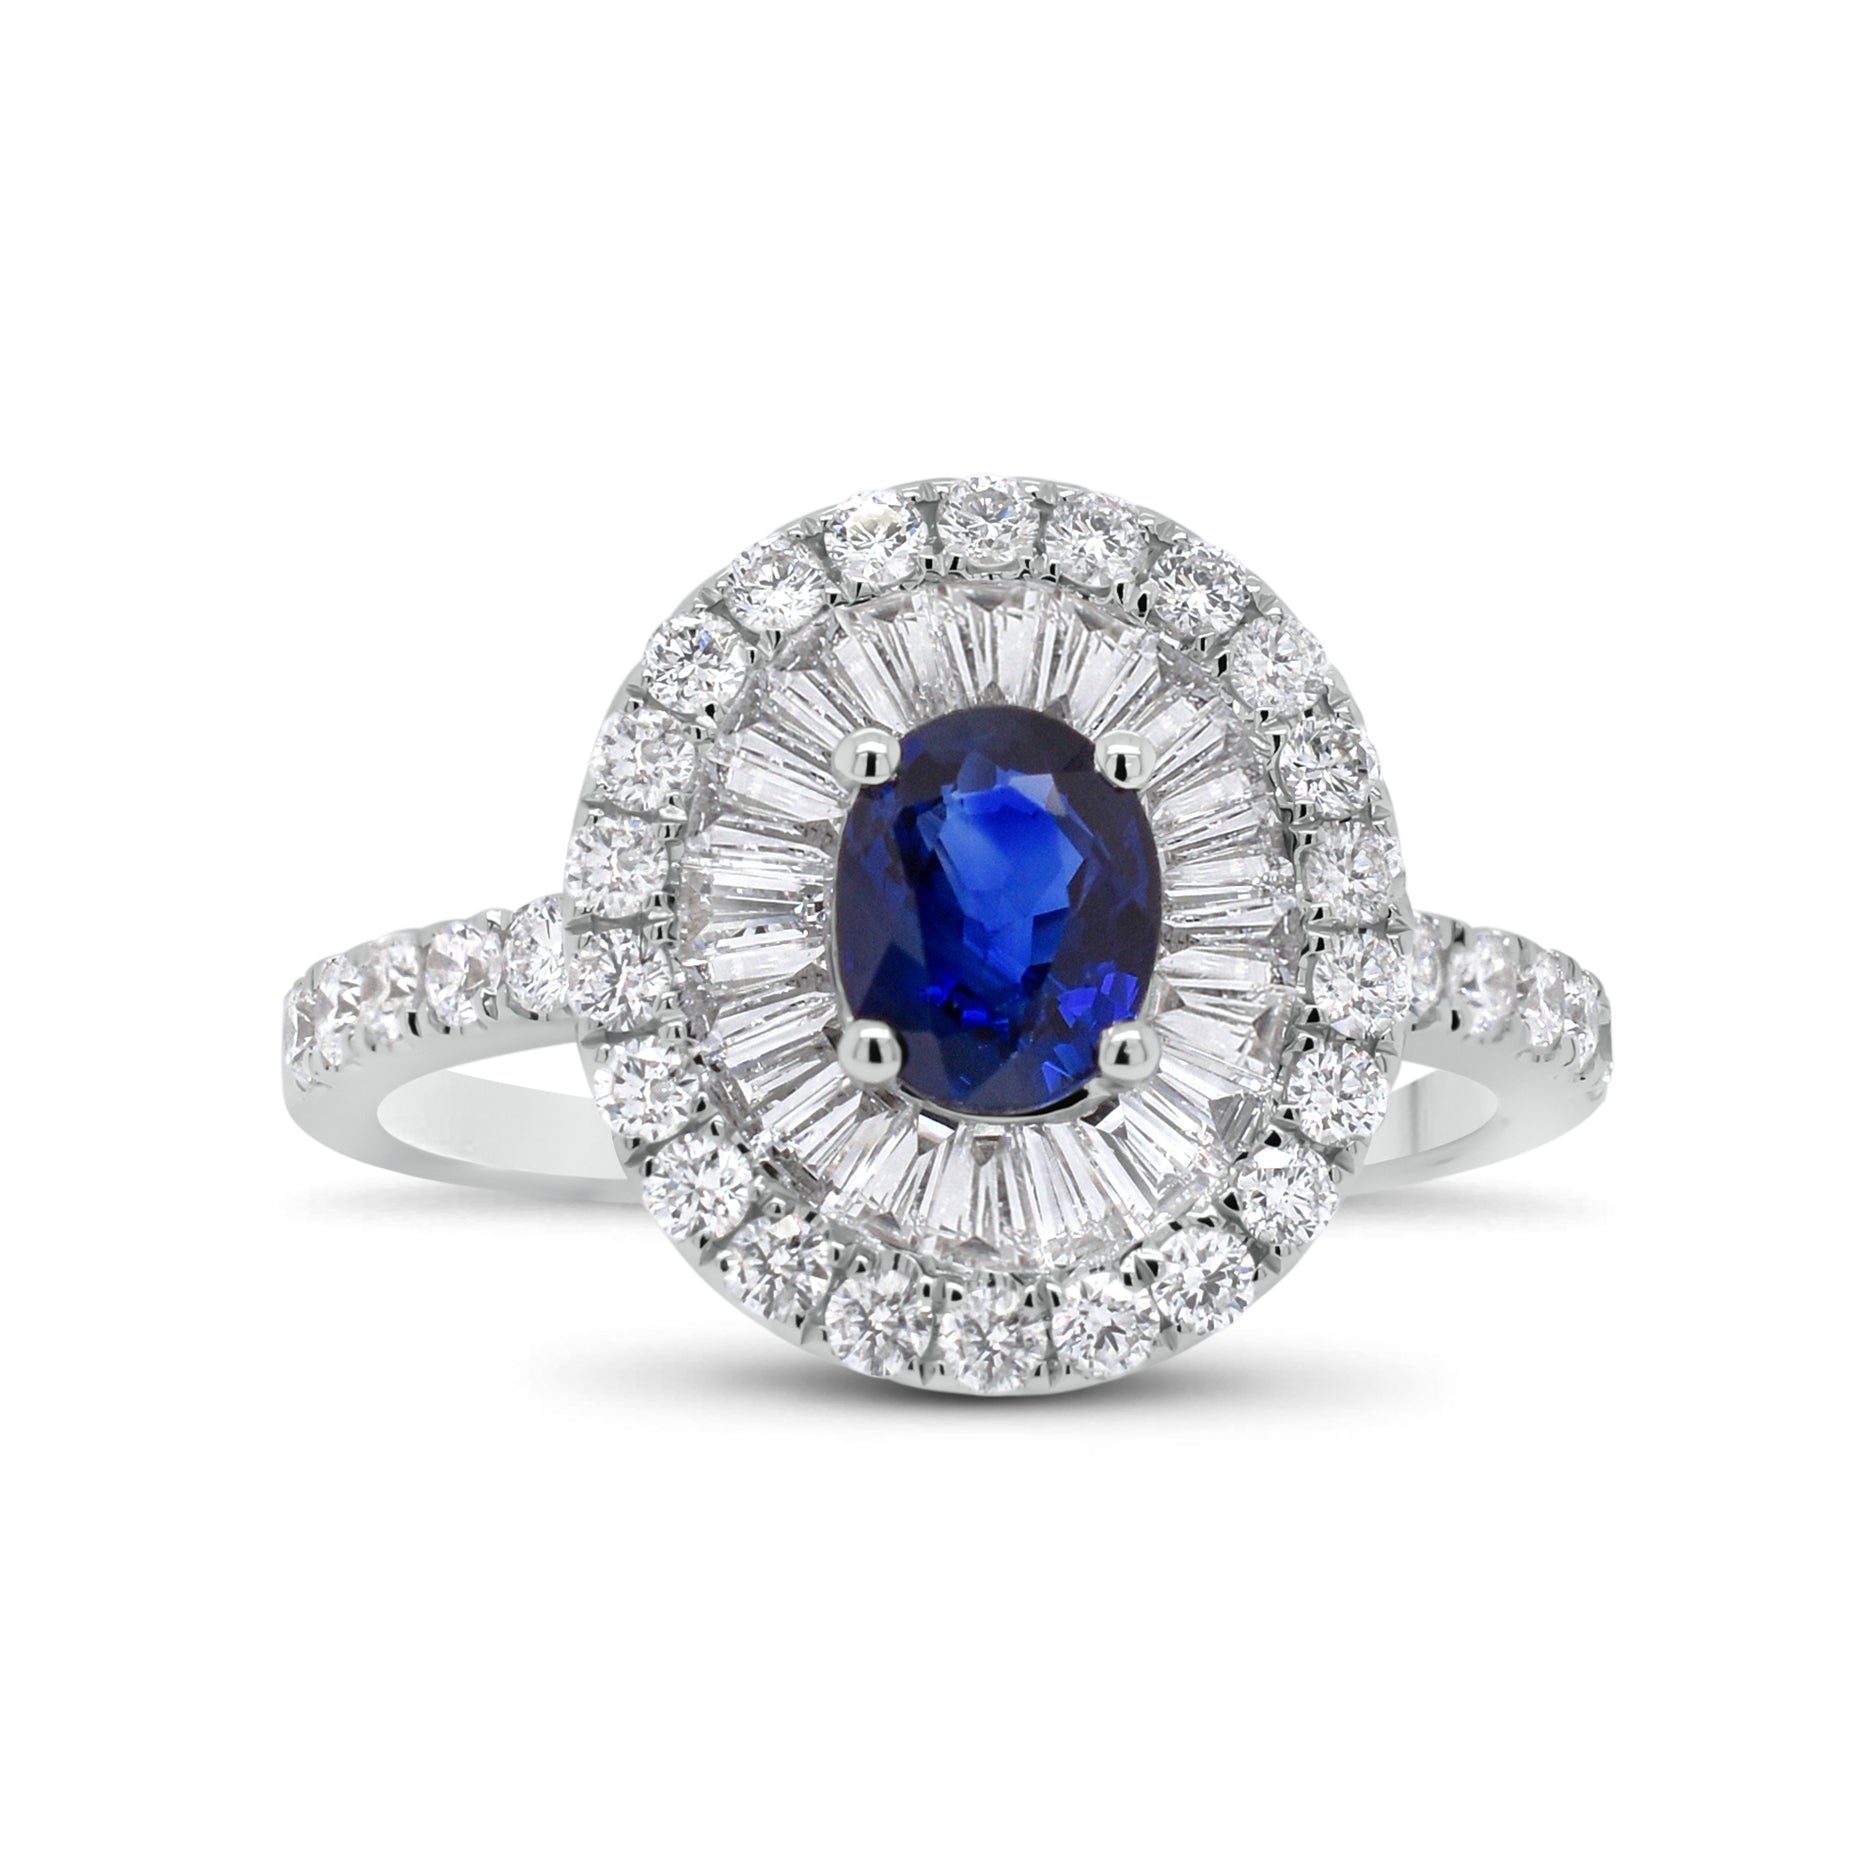 Sapphire double halo ring  - 18K gold weighing 3.88 grams  - 32 round diamonds totaling 0.55 carats  - 21 tapered baguettes totaling 0.51 carats  - 0.82 ct sapphire